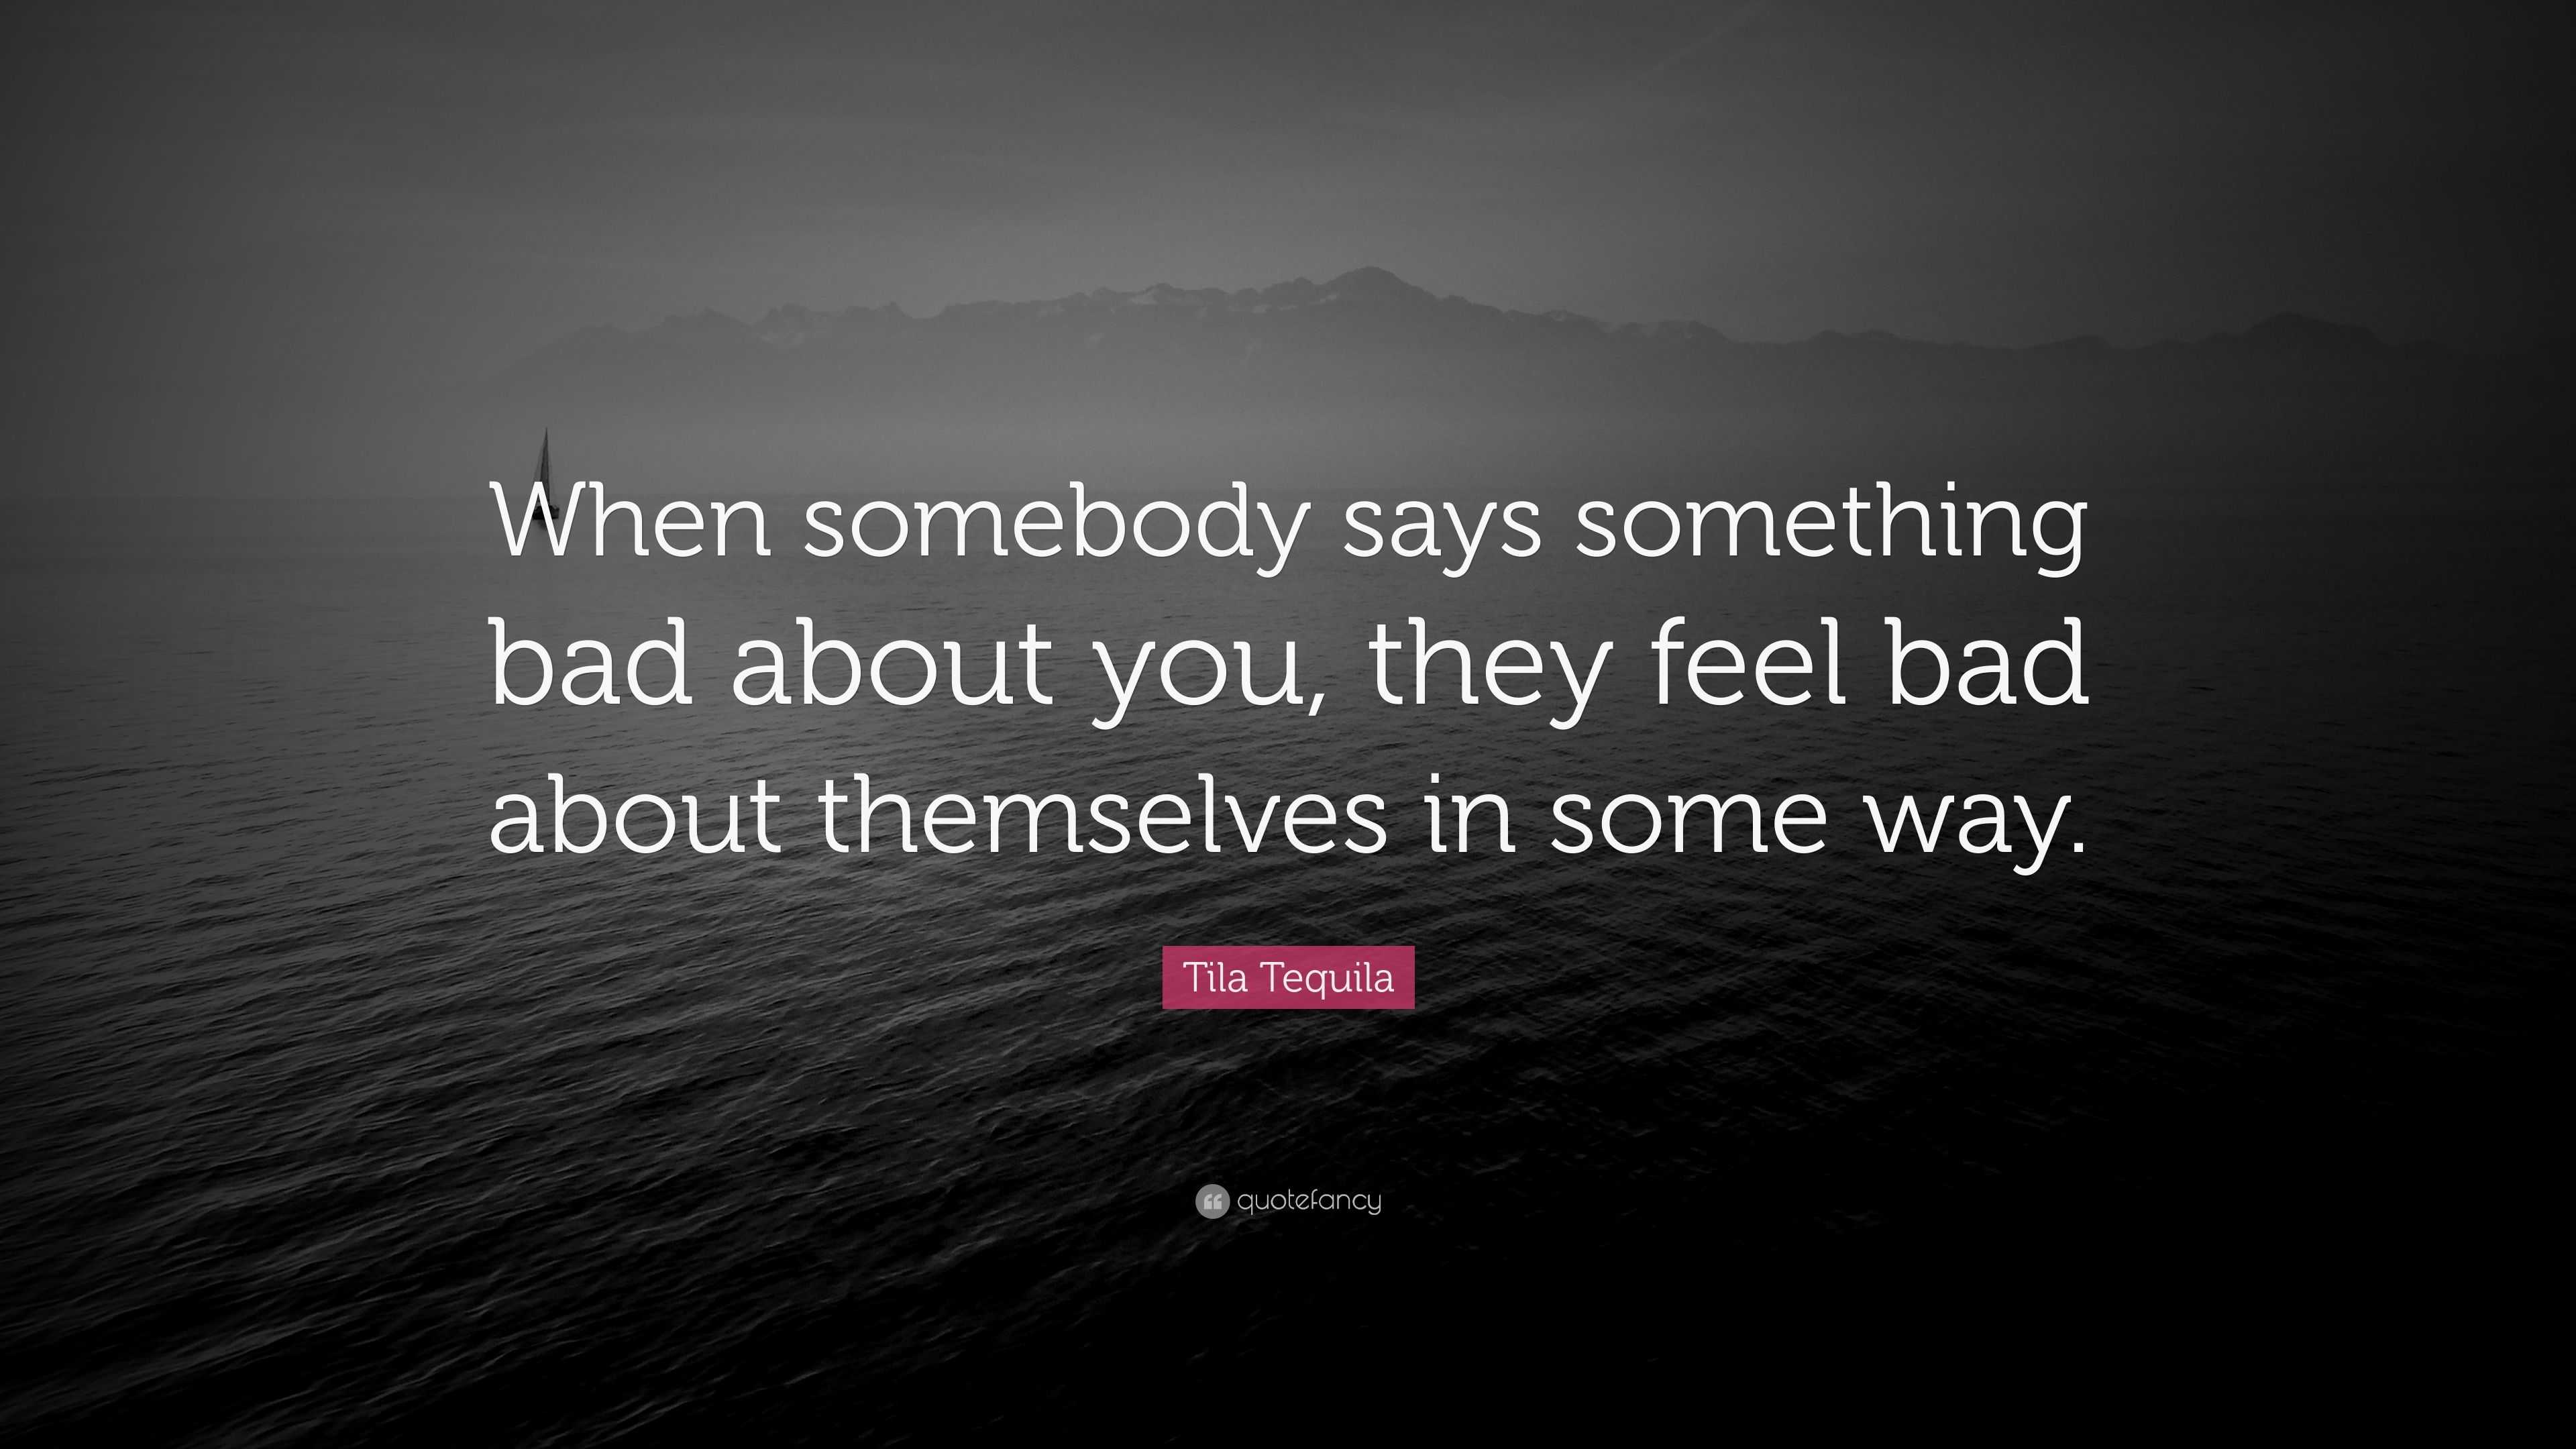 Tila Tequila Quote: "When somebody says something bad about you, they feel bad about themselves ...